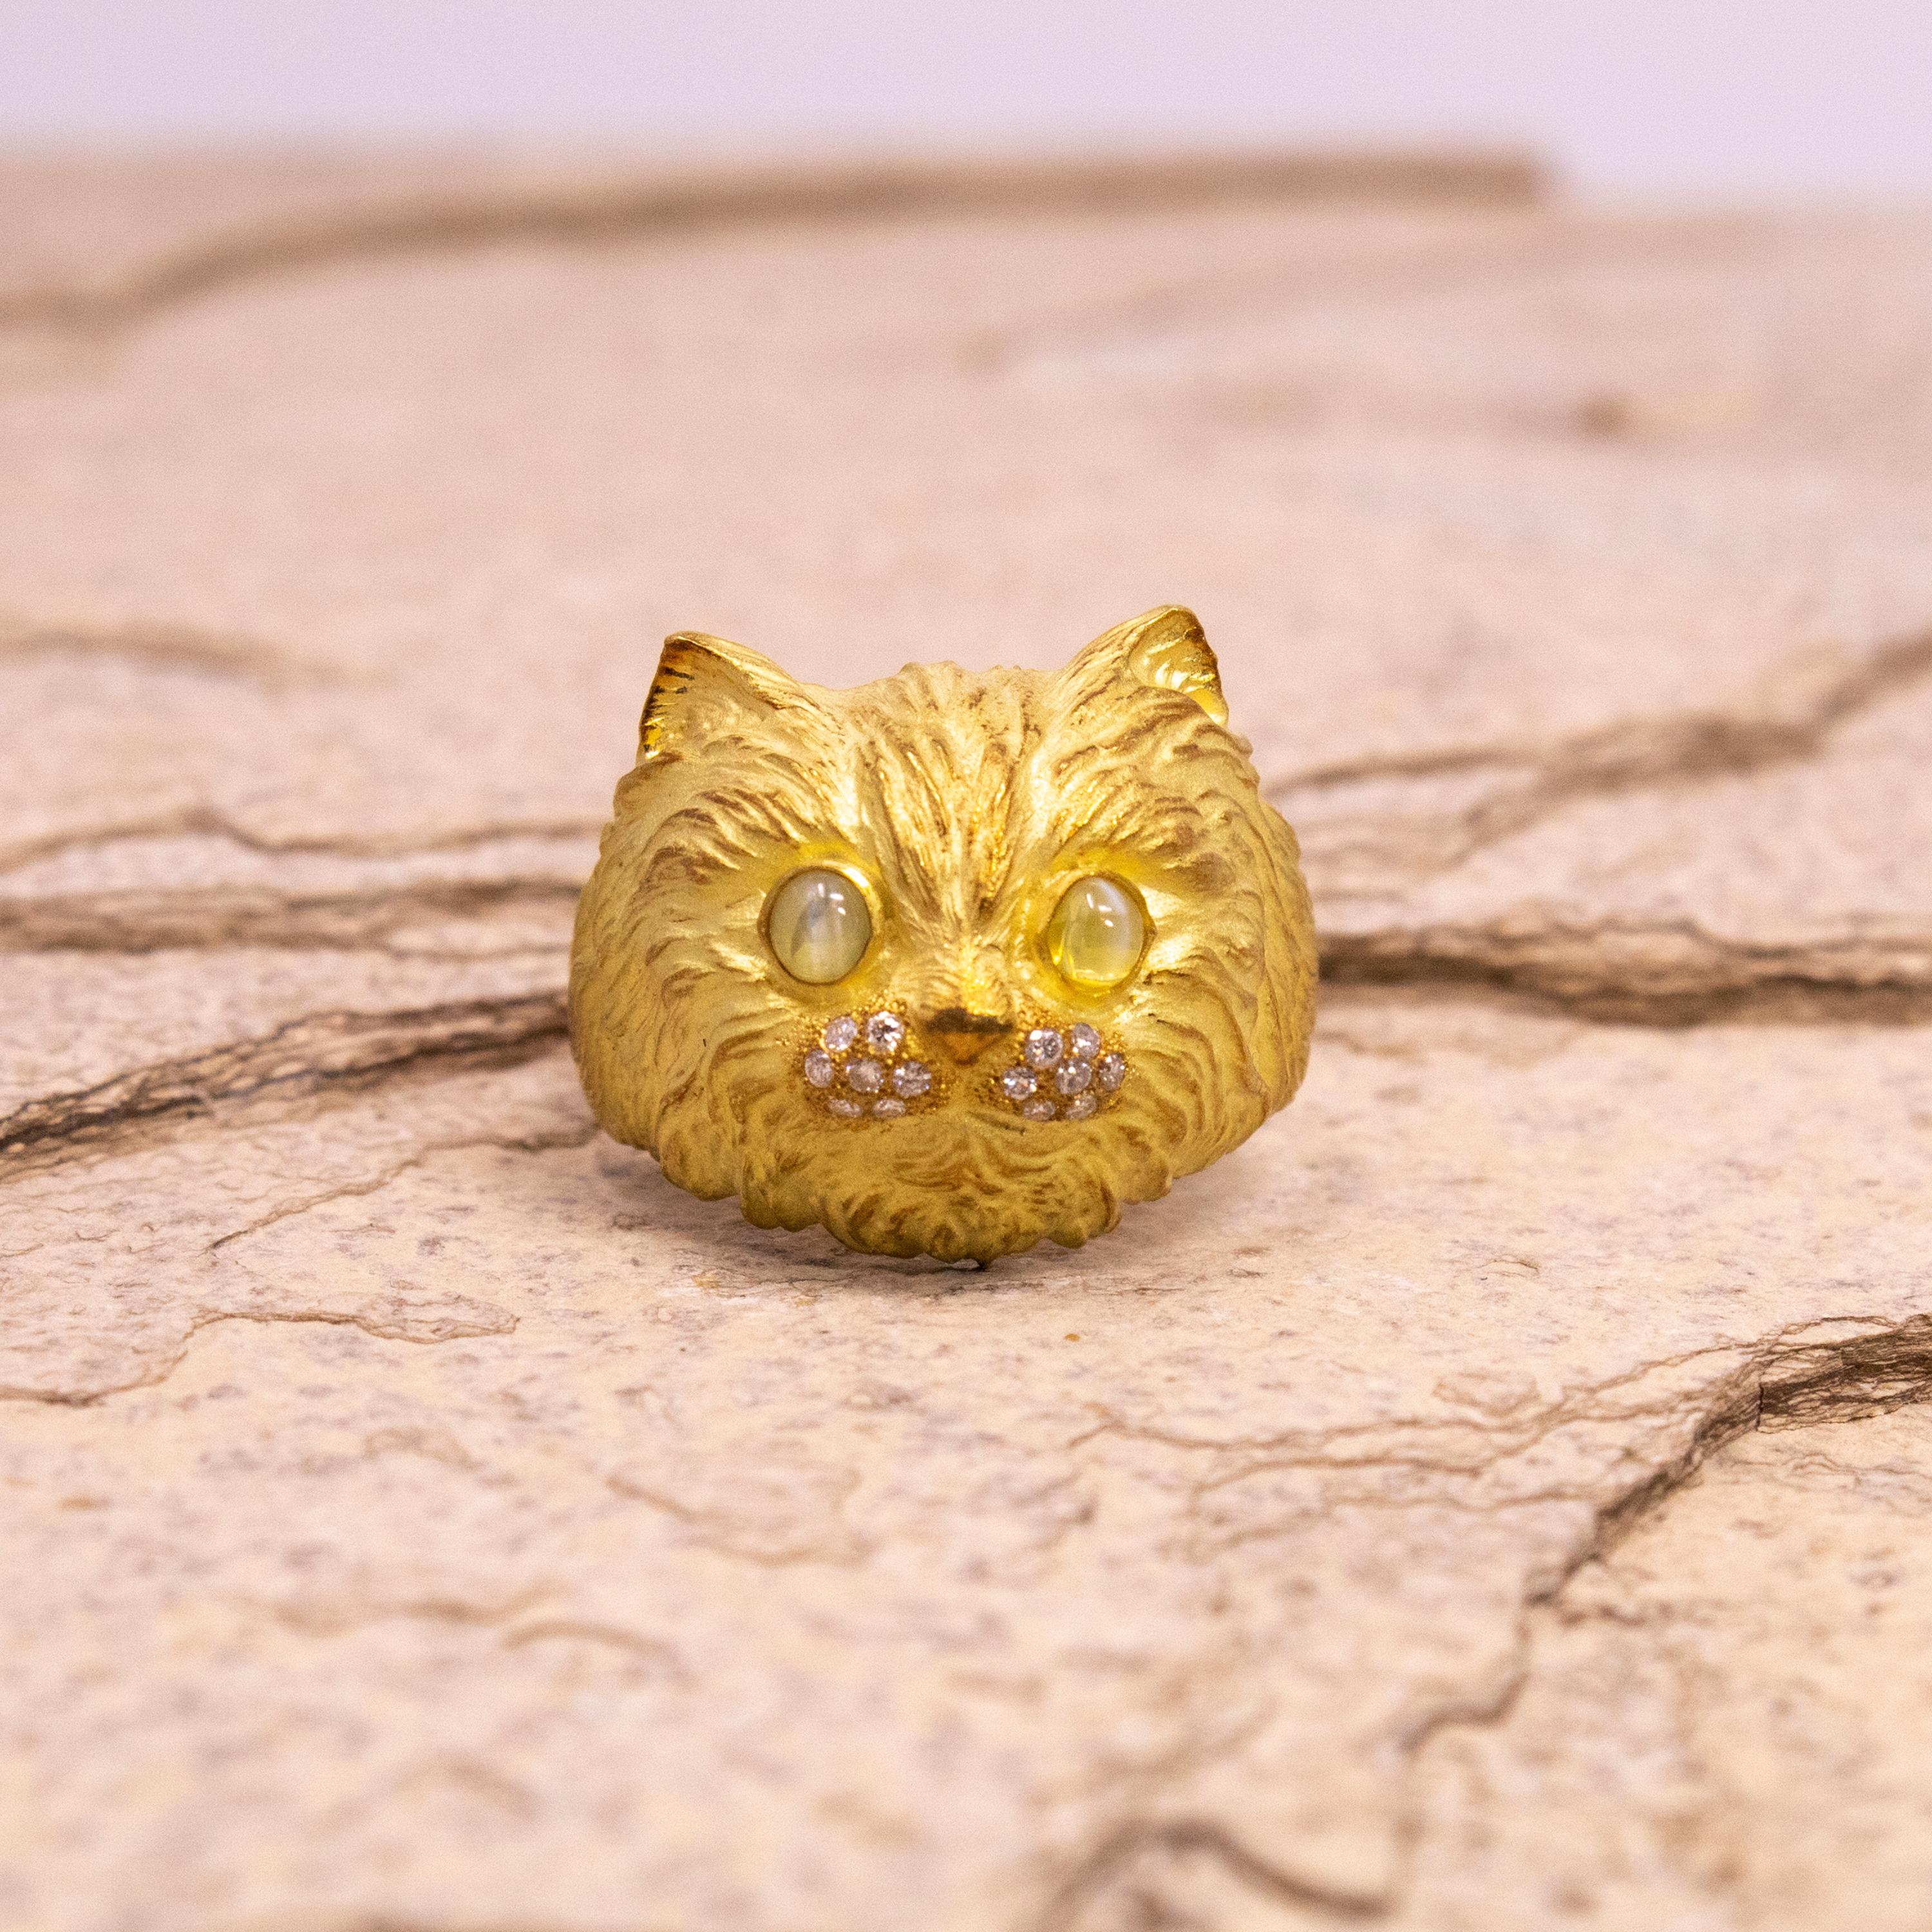 This exquisitely rendered 18kt feline ring is perfect for anyone who has an adoring cat (or two, or three!). The flashing cat's eye chrysoberyl are a perfect choice for this cat's eyes, and the beautiful quality diamonds give just the right amount